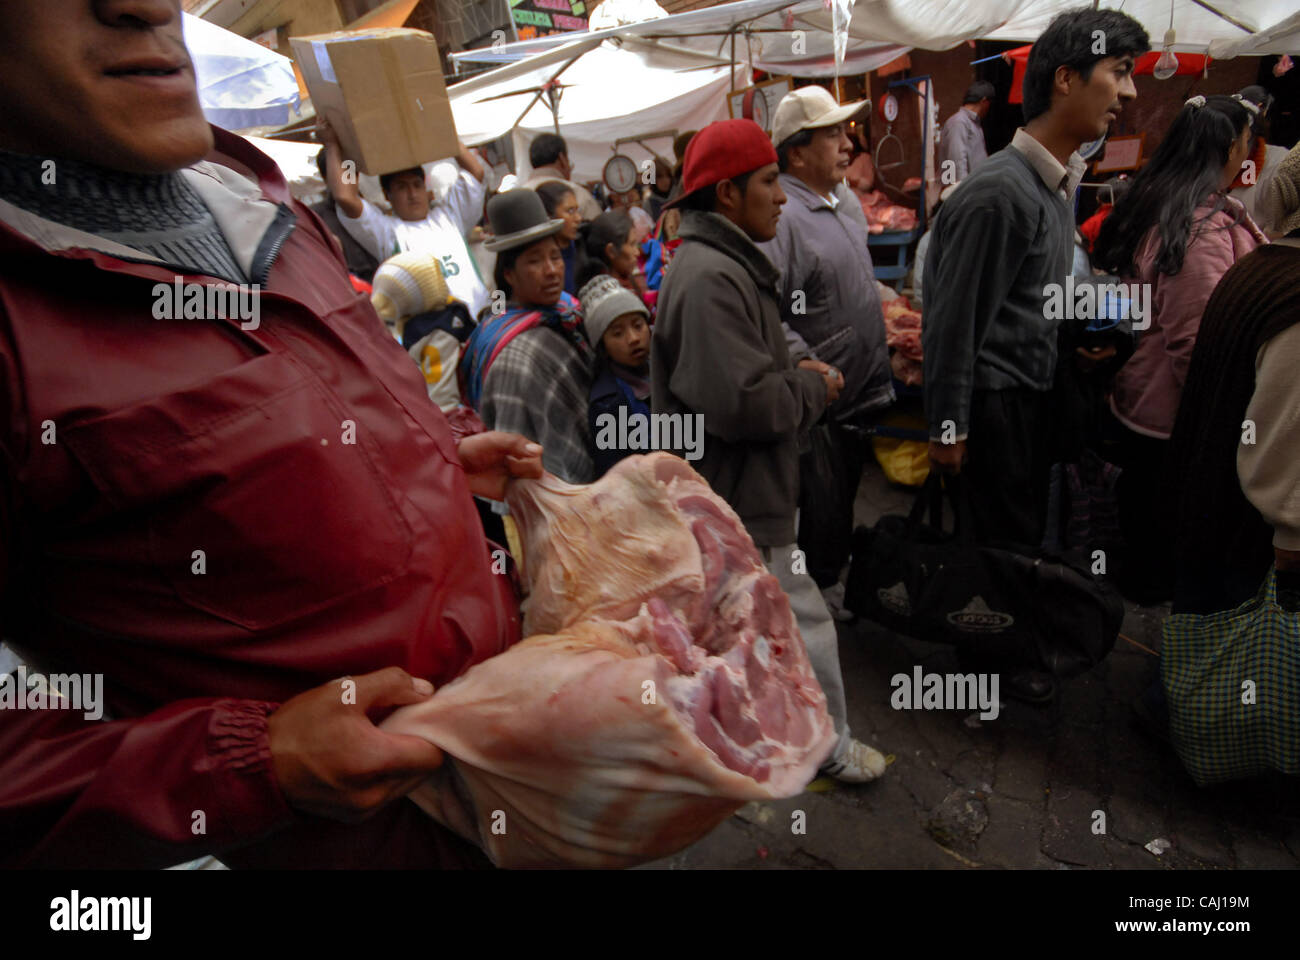 Dec 31, 2007 - La Paz, Bolivia - A man ships pork meat in La Paz Garita de Lima's street market. Every 31st December in La Paz, thousands of dead pigs are brought to the city to be sold, coming from Cochabamba, Santa Cruz and all La Paz areas. The bolivian tradition to eat pork to celebrate the new  Stock Photo